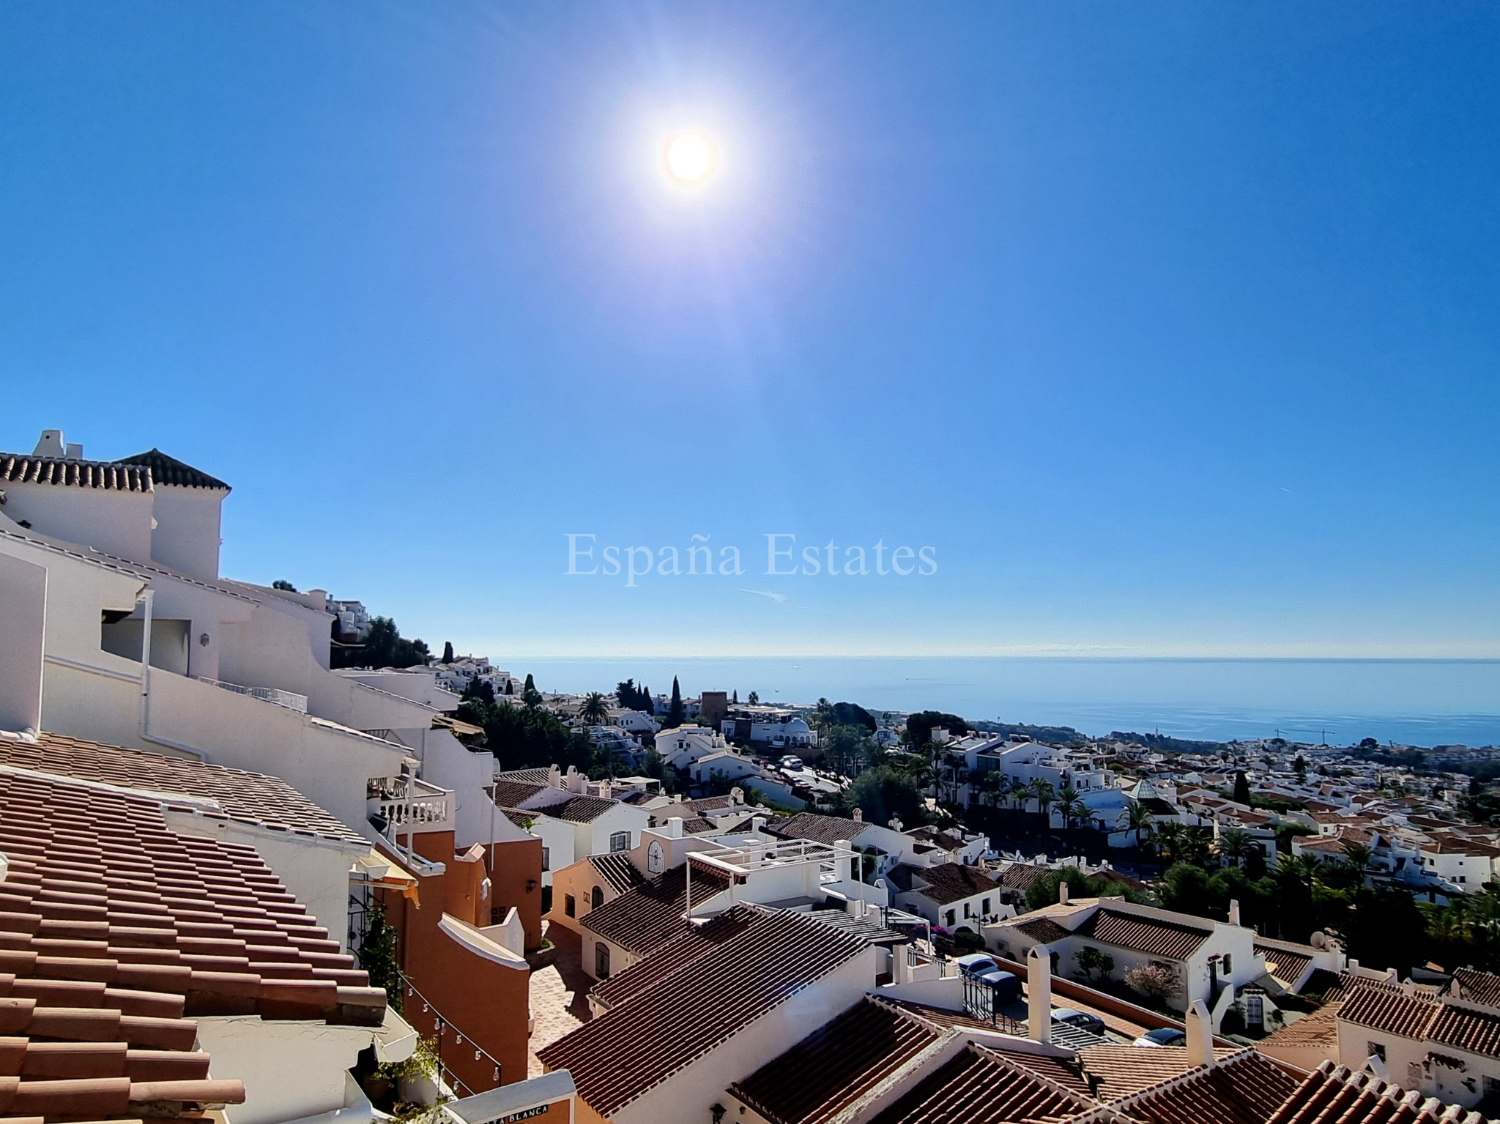 The best view in Nerja!